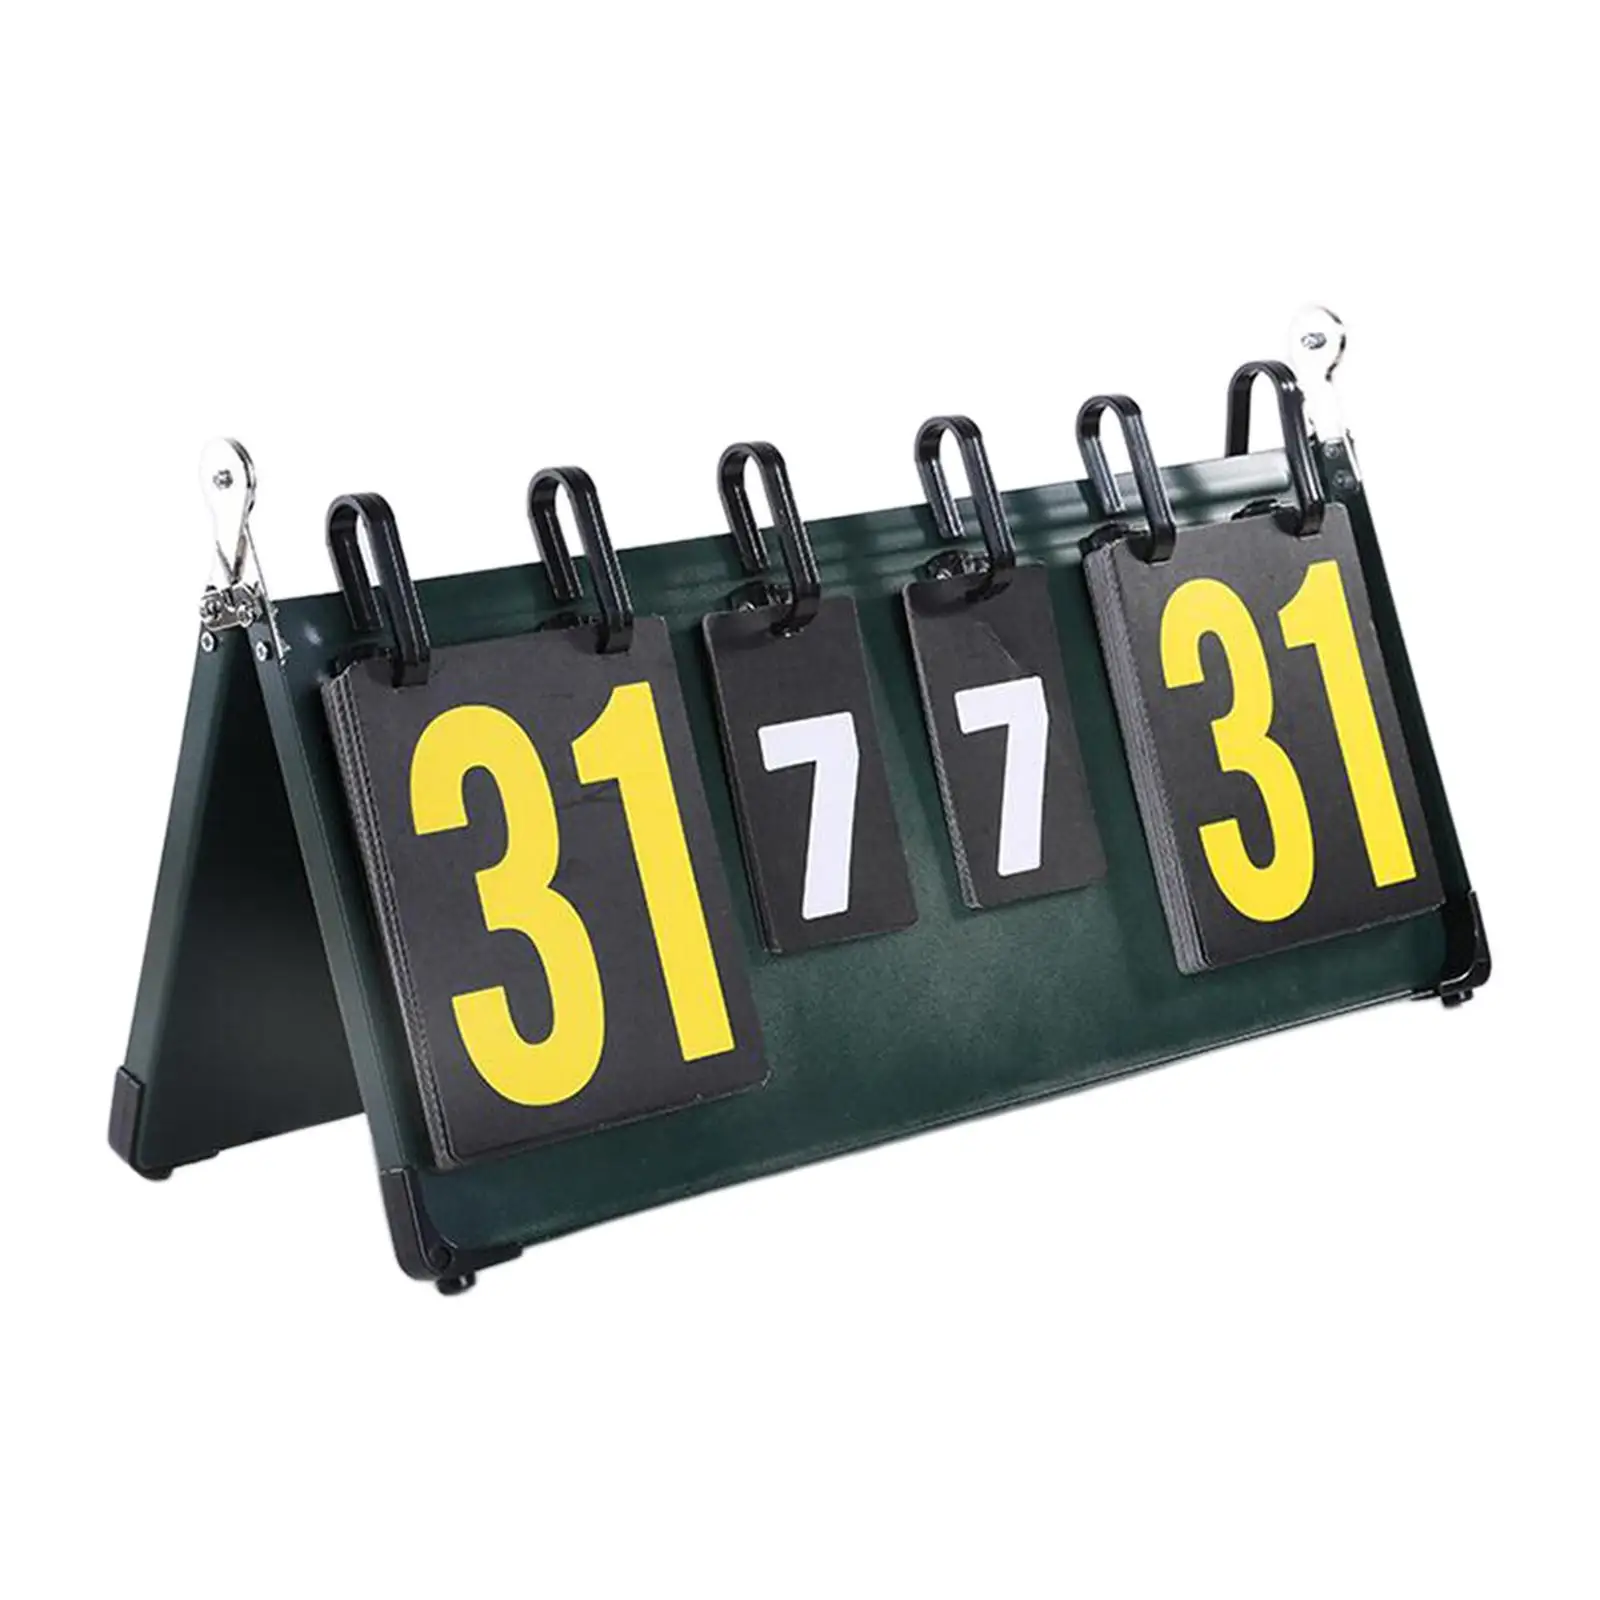 Tabletop Scoreboard Digital Professional Keeper for Basketball Volleyball Competition Tennis Indoor Outdoor Sports